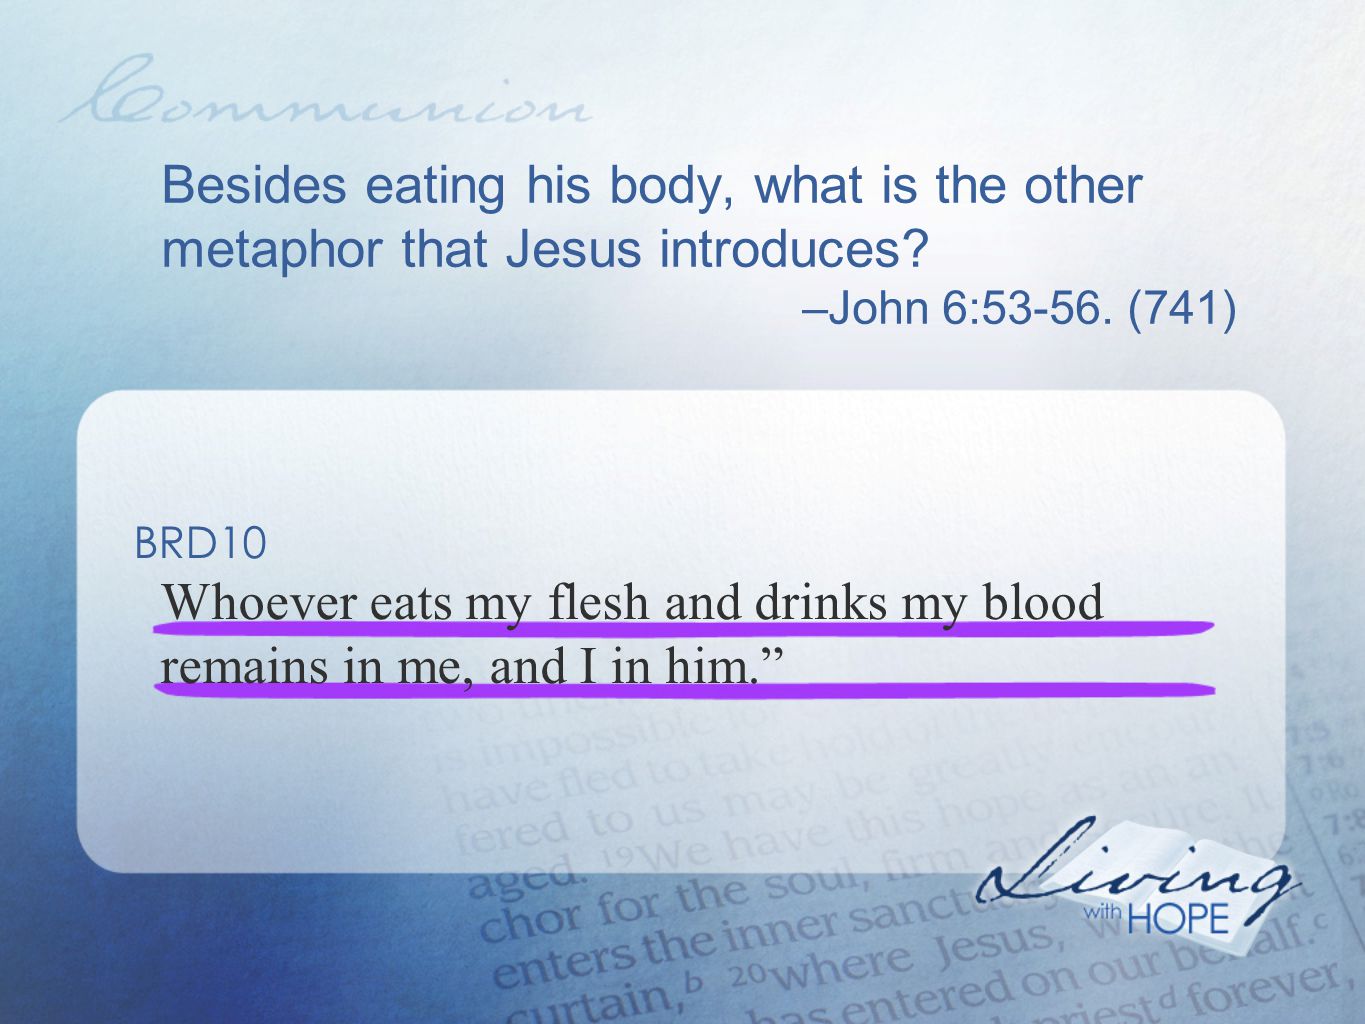 Besides eating his body, what is the other metaphor that Jesus introduces